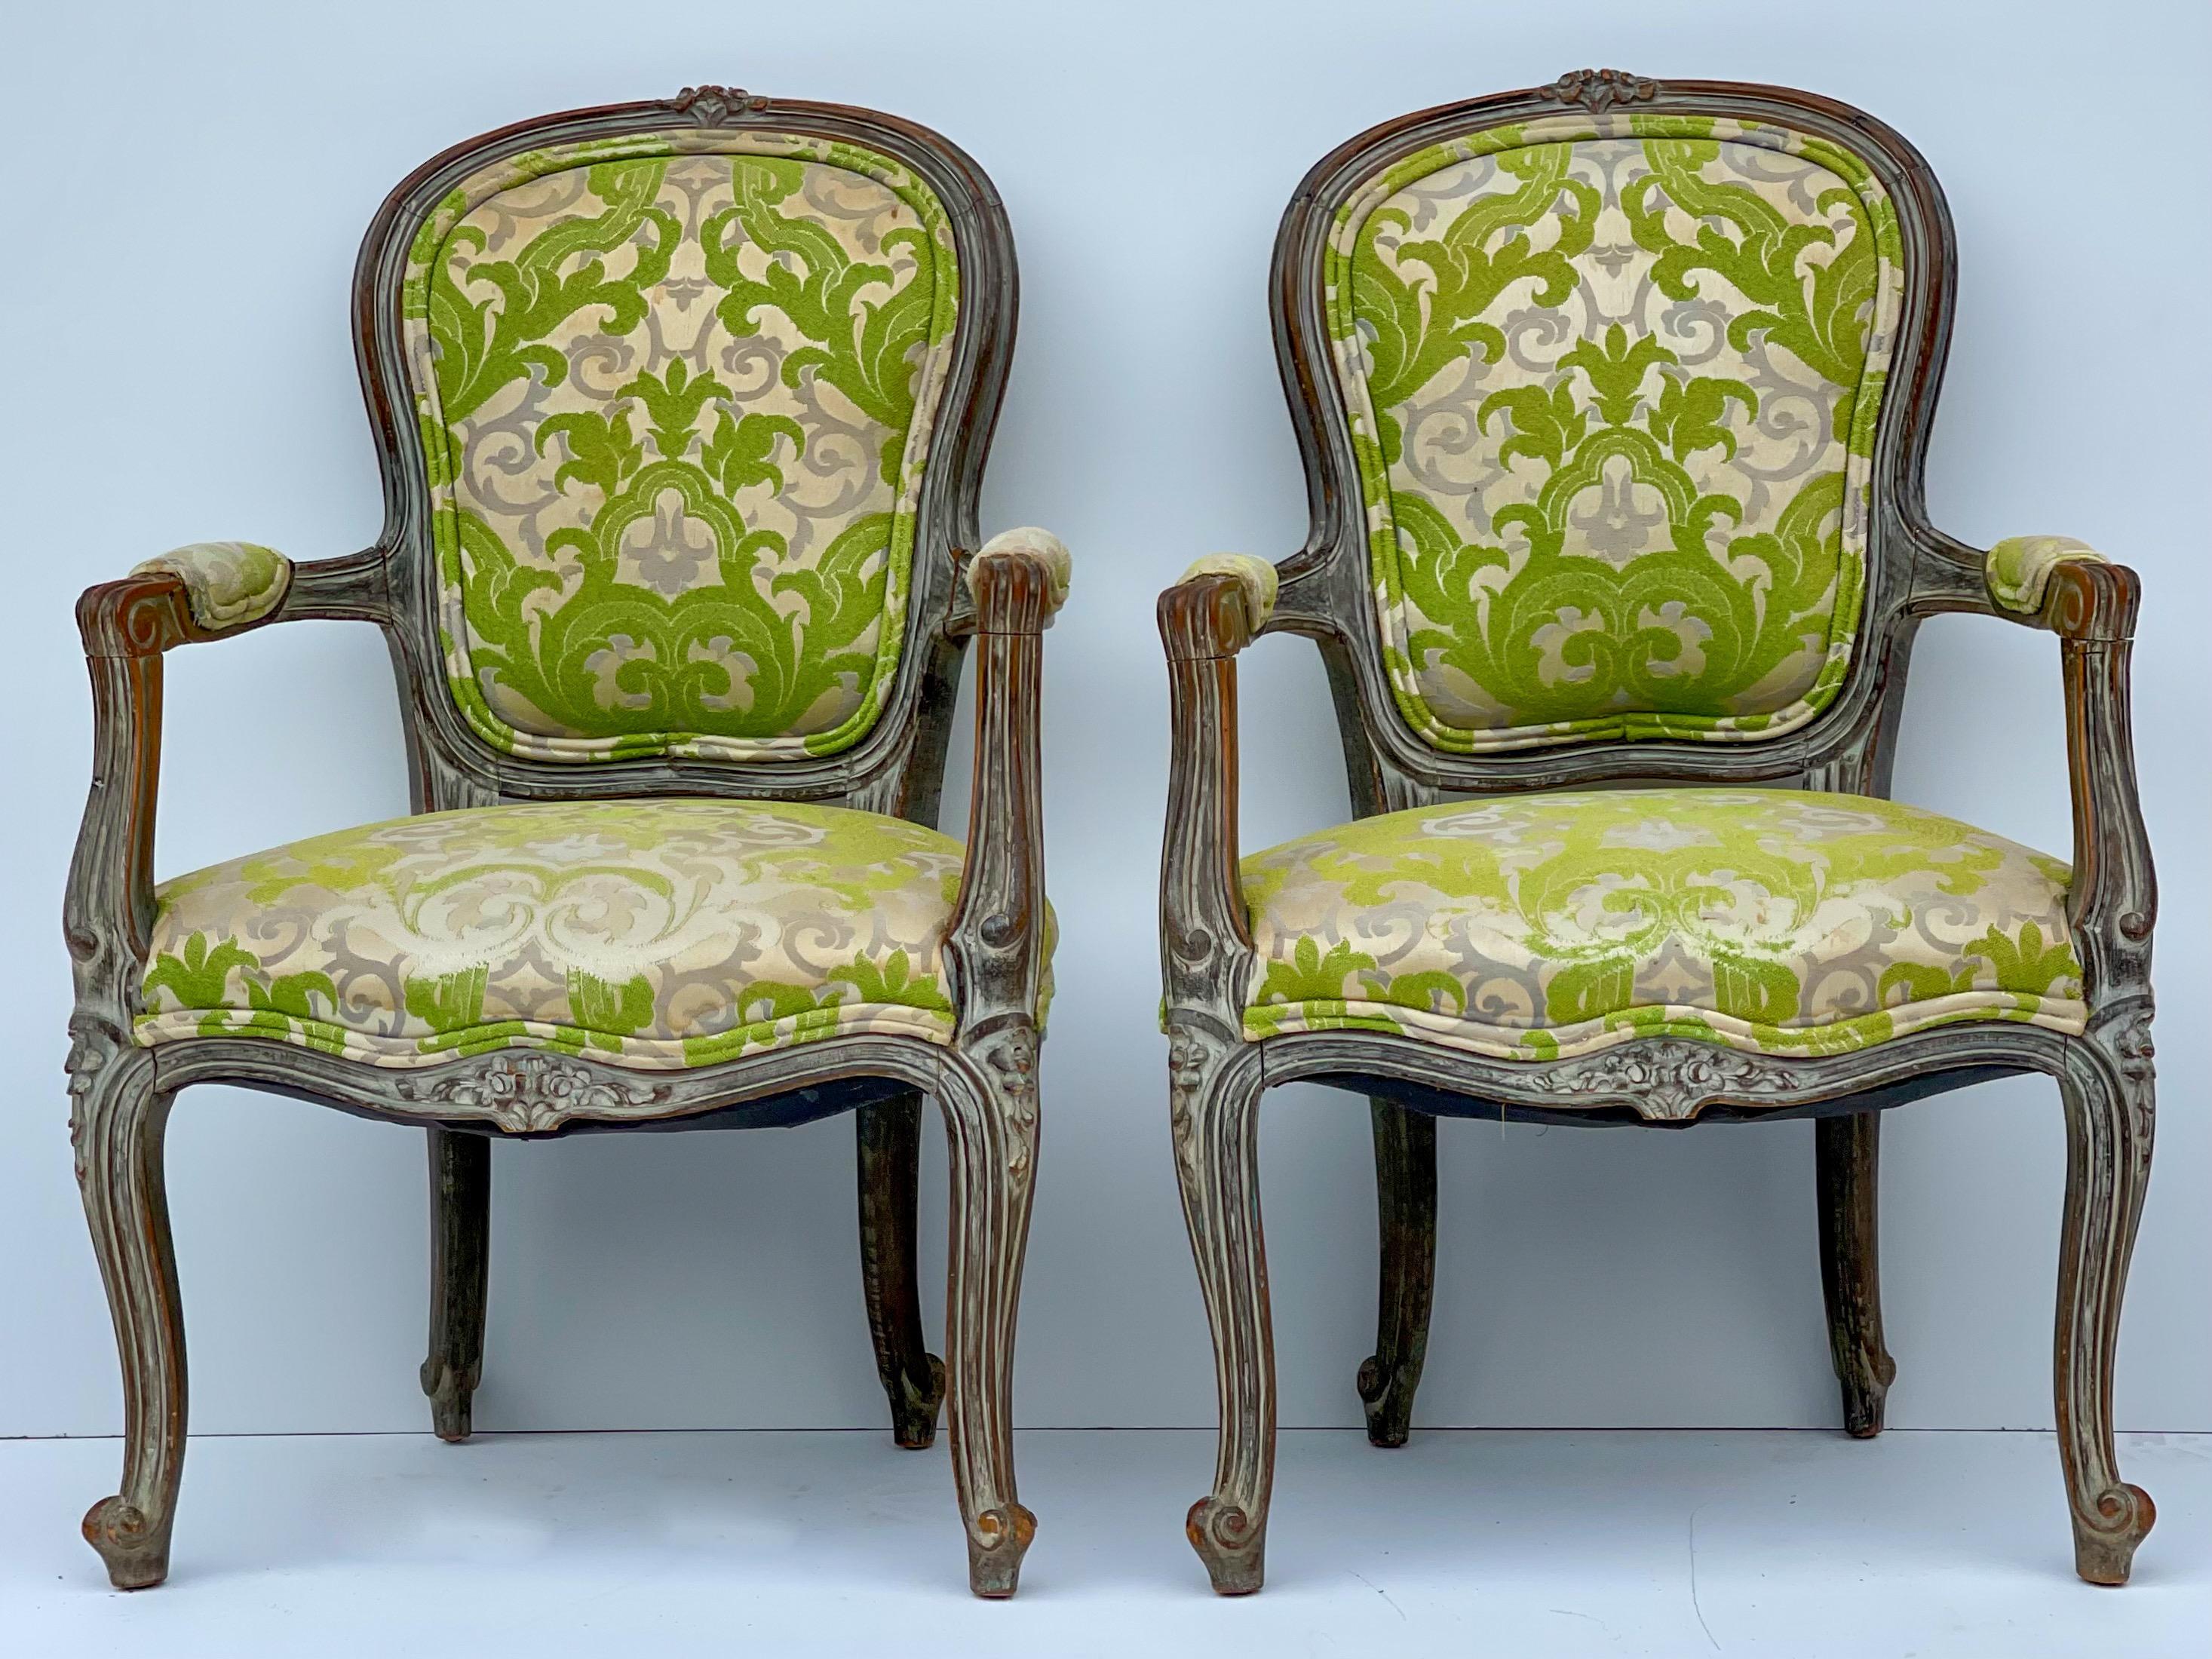 Early French Louis XVI Style Child’s Chairs in Chartreuse Damask, Pair In Good Condition For Sale In Kennesaw, GA